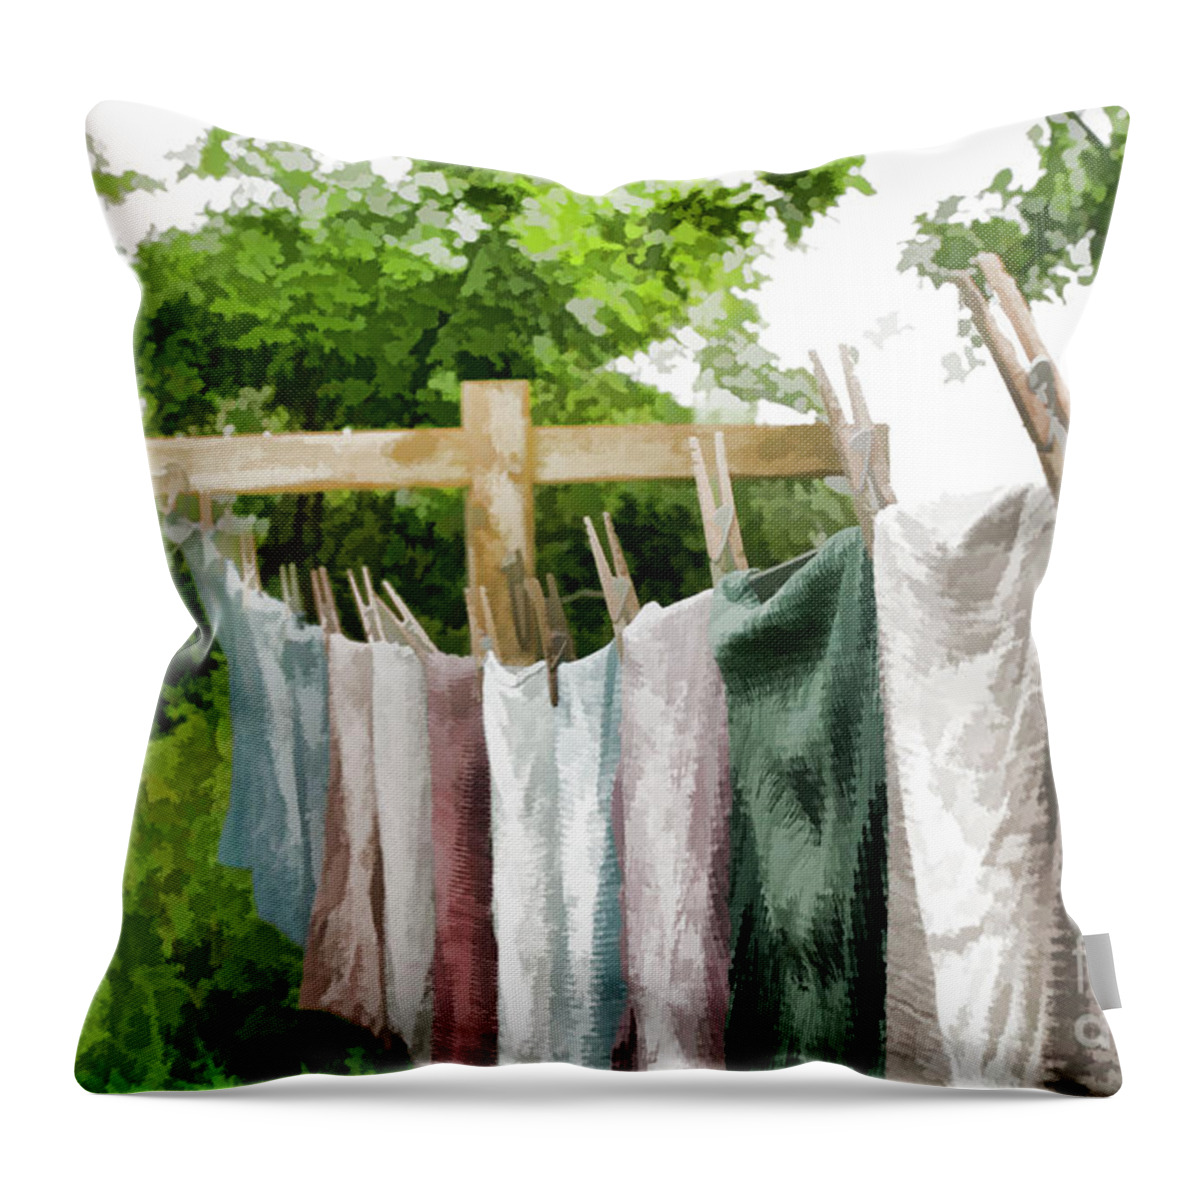 Washday Throw Pillow featuring the photograph Iowa Farm Laundry Day by Wilma Birdwell